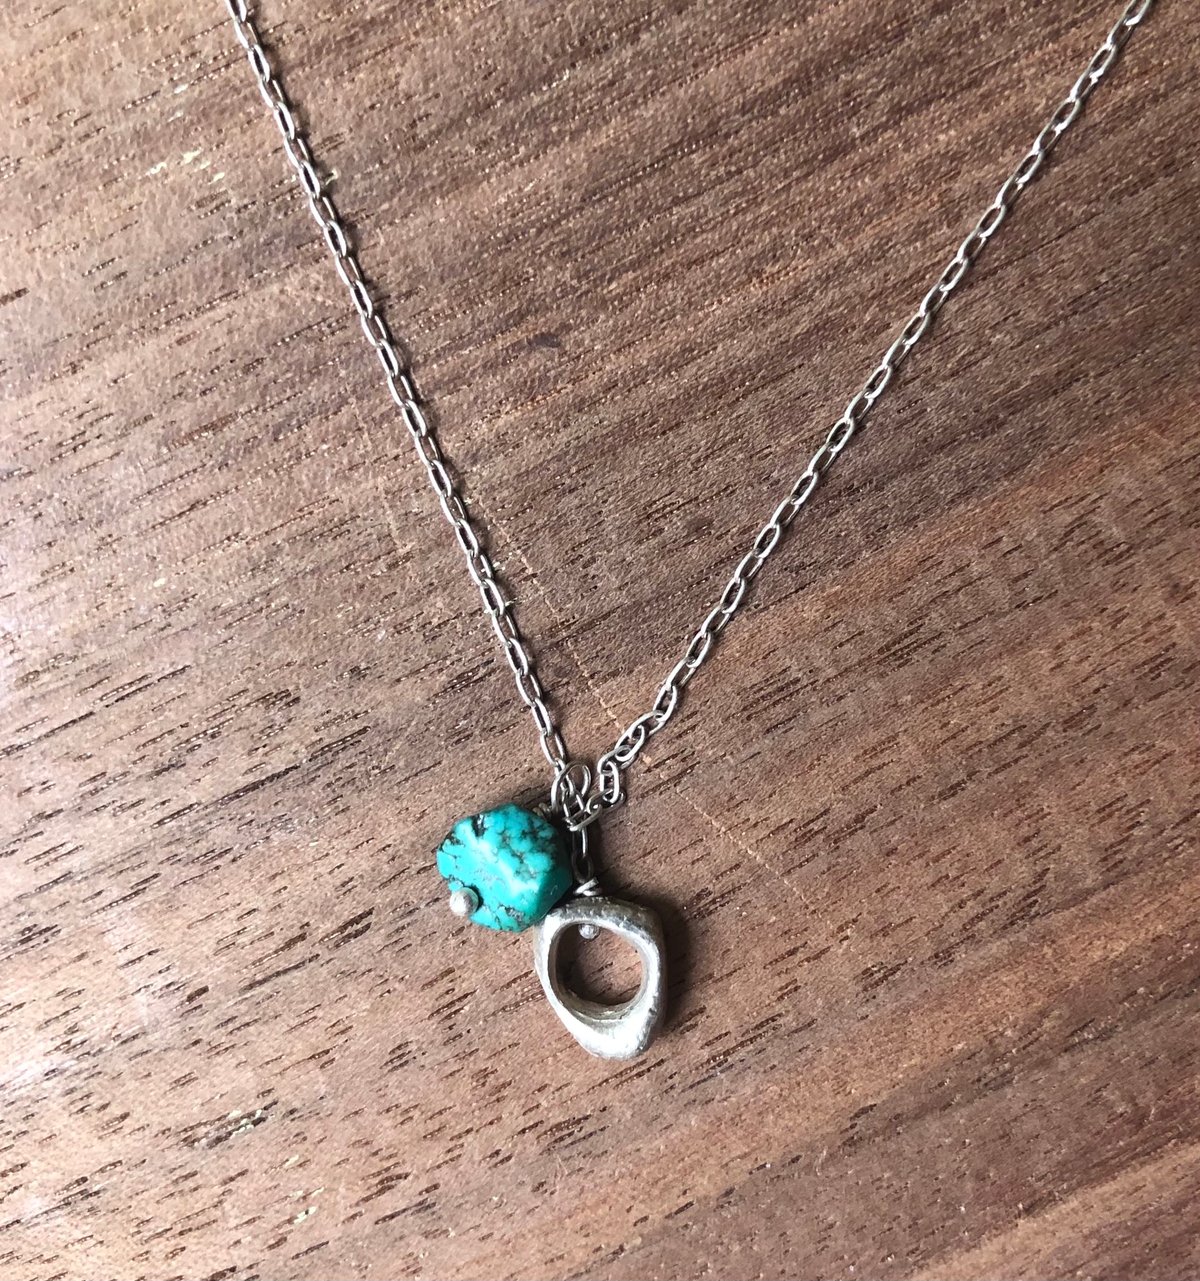 Tiny texture necklace with turquoise 